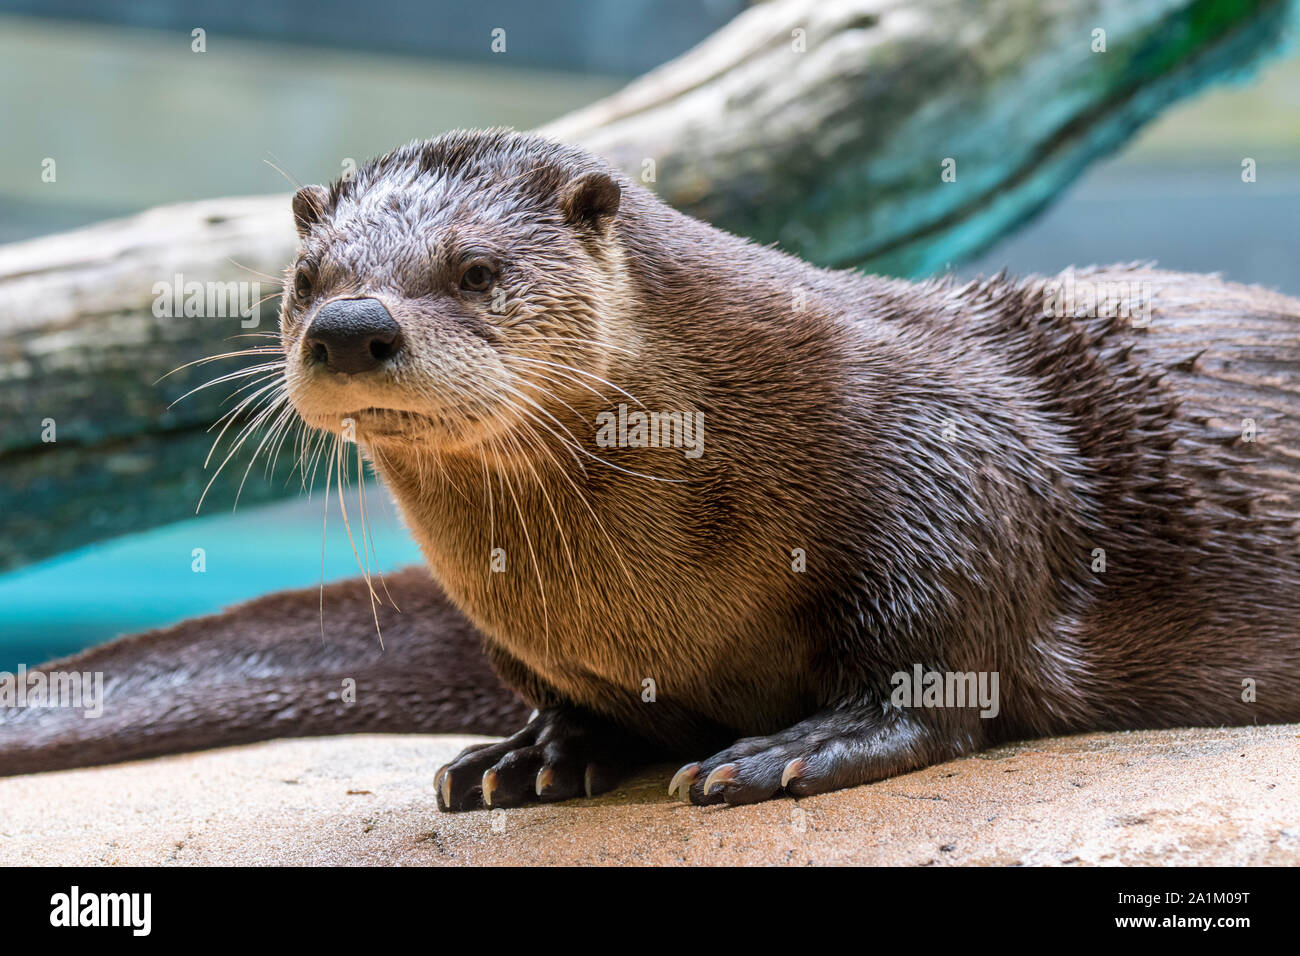 North American river otter / northern river otter / common otter (Lontra canadensis / Lutra canadensis) native to the the United States and Canada Stock Photo